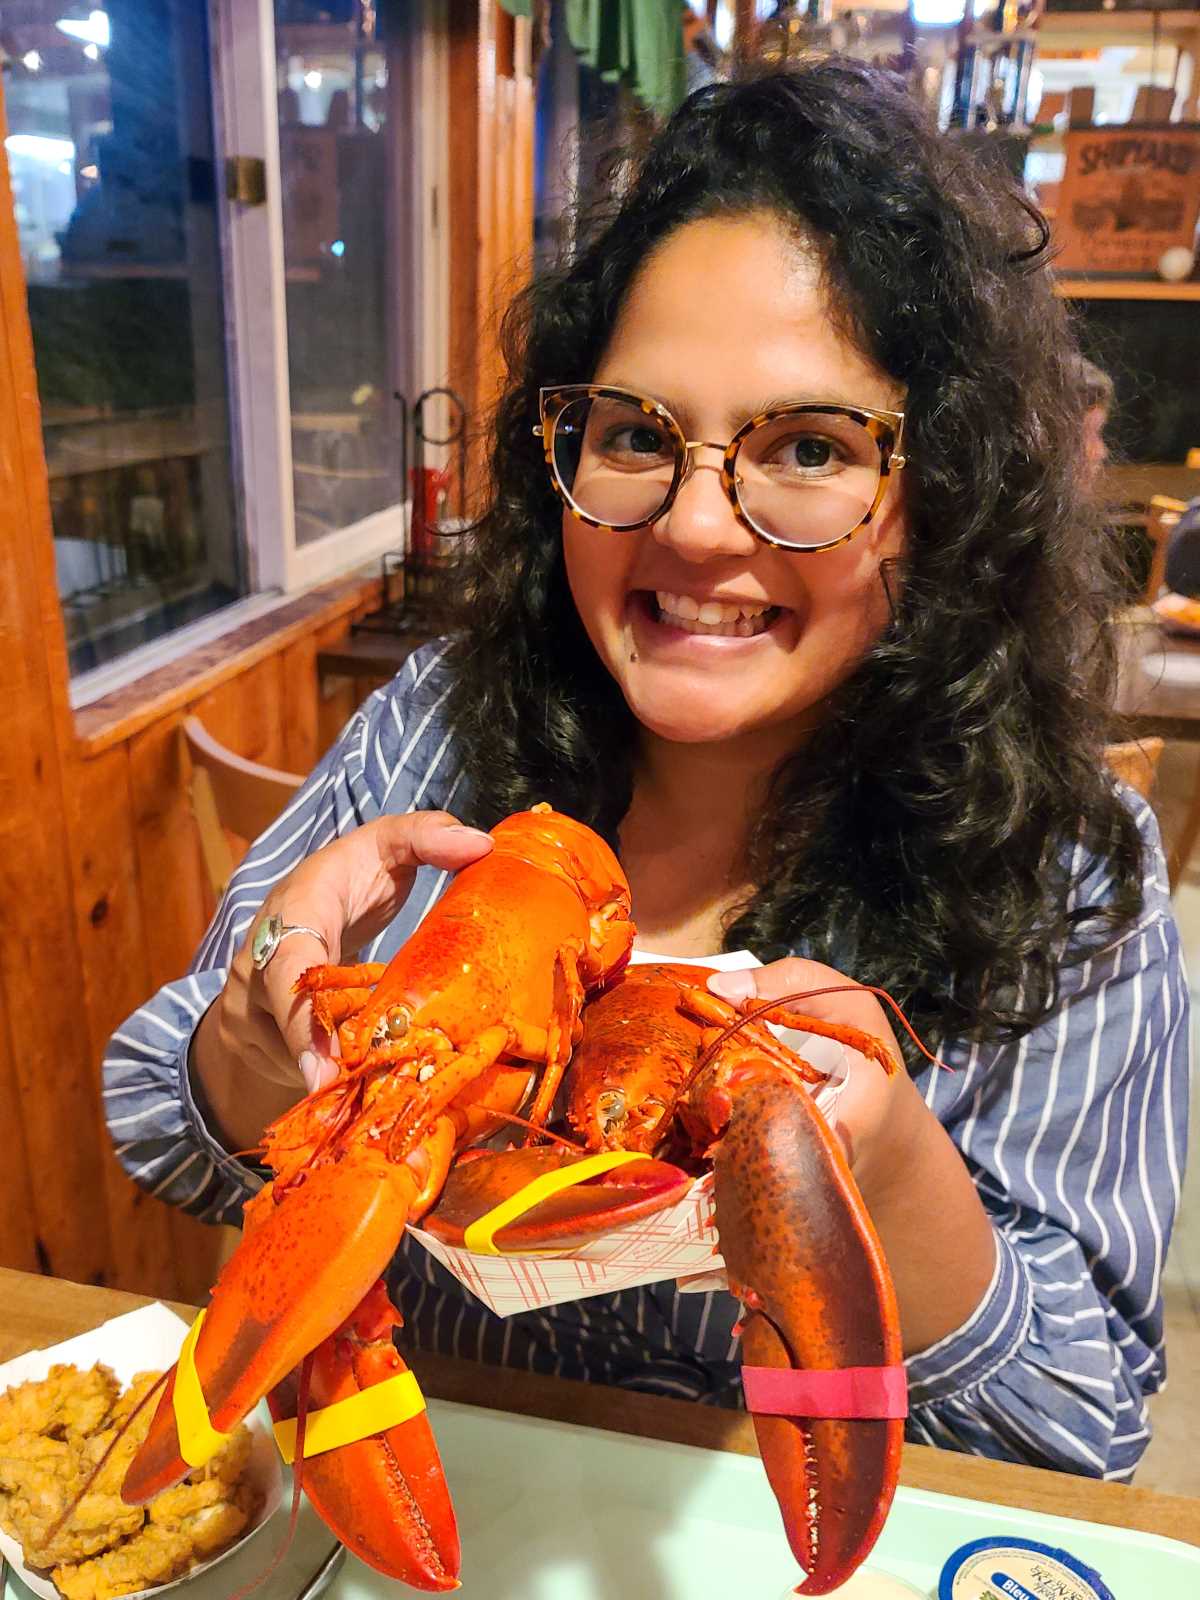 Holding a whole steamed lobster in Maine